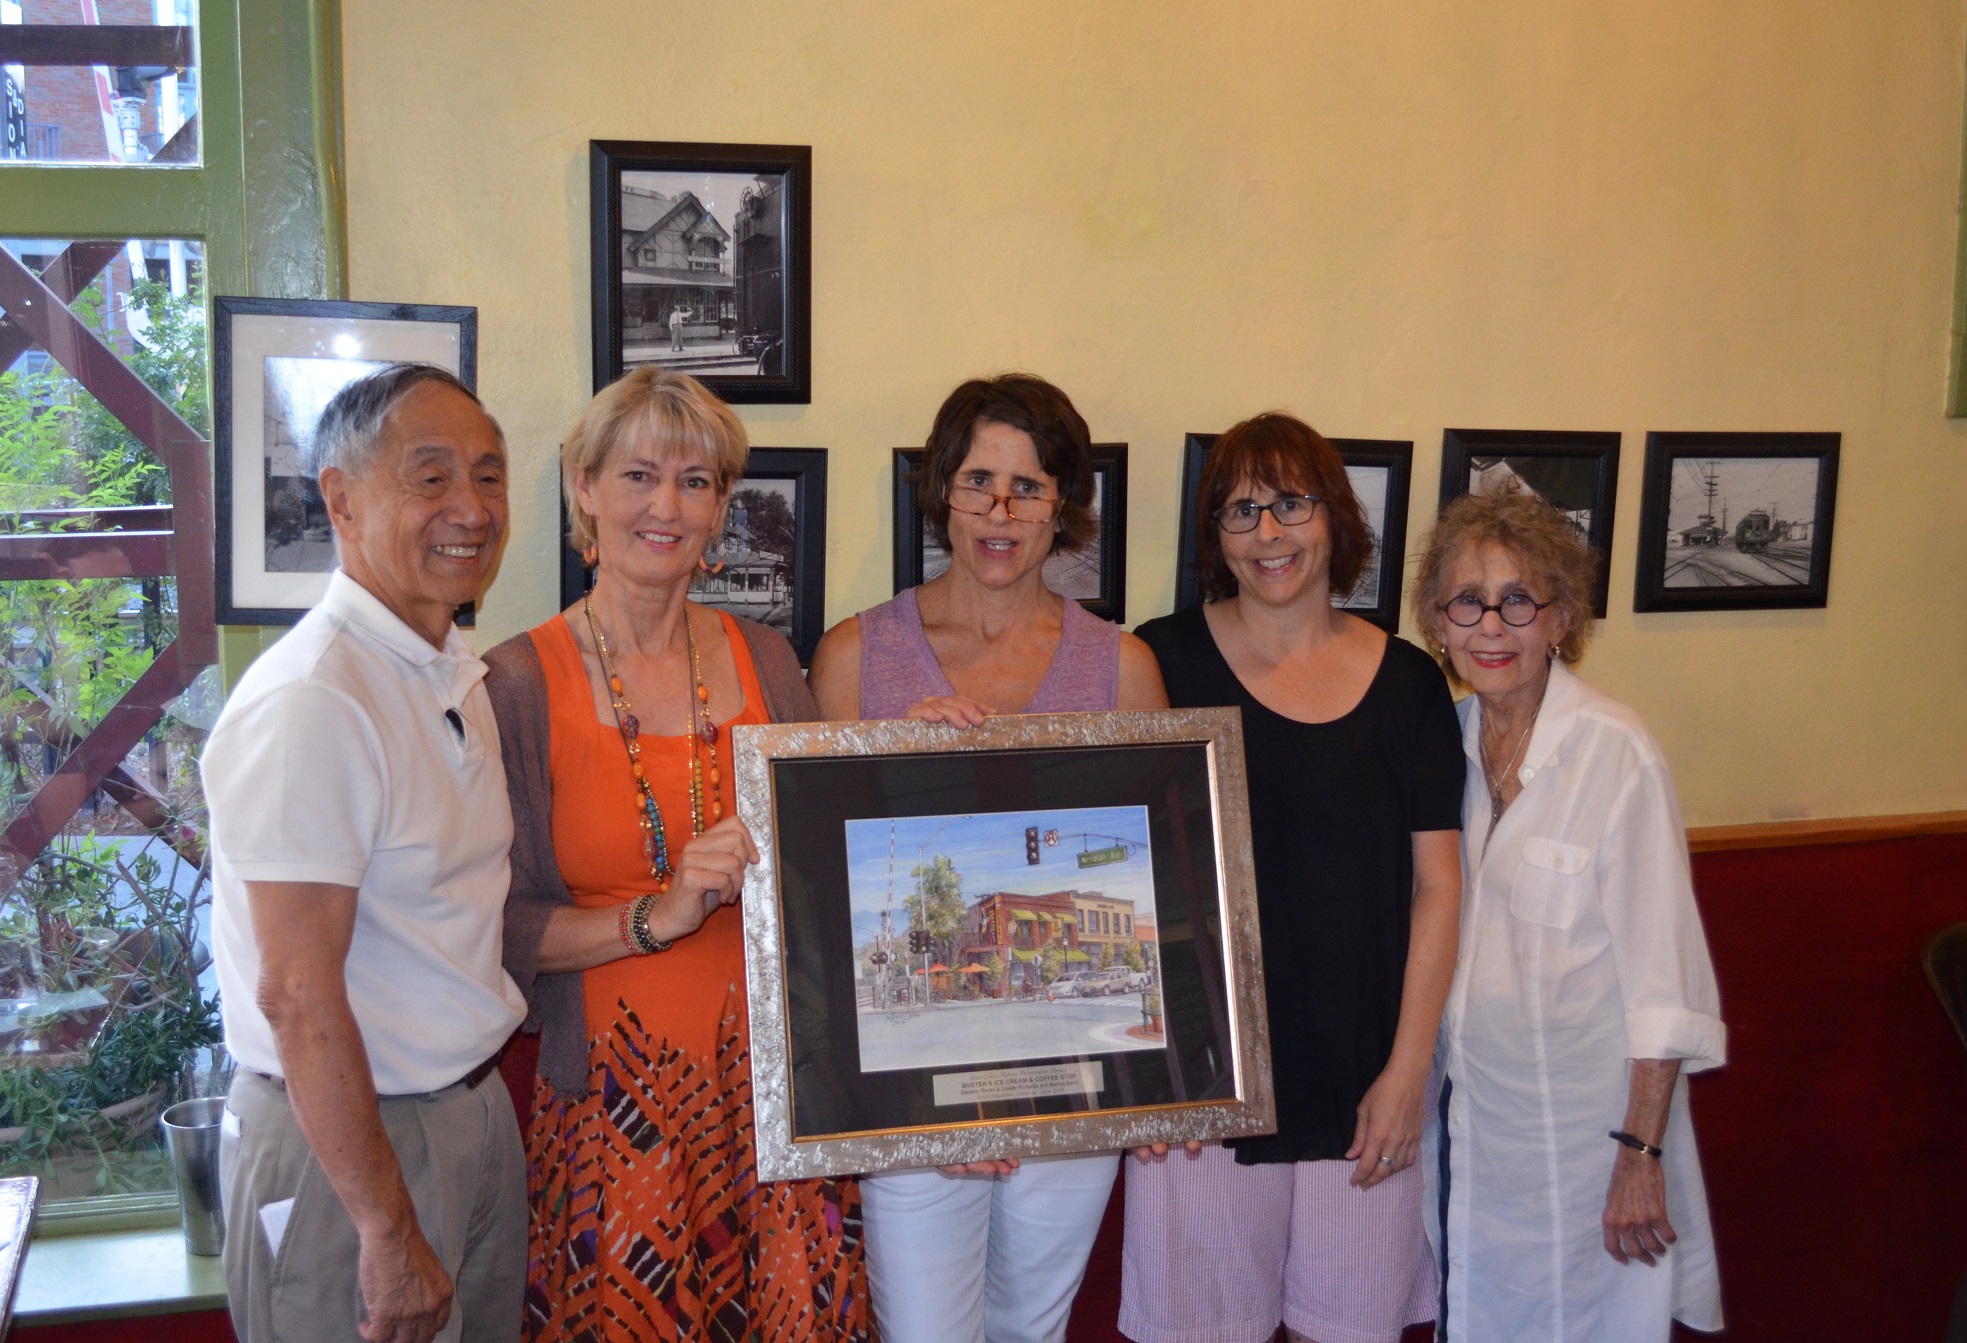 Left-to-Right-Mayor-Robert-Joe-Artist-Leisa-Collinssisters-Renee-and-Colette-Richards-and-the-Richards-matriarch-Clara-Richards